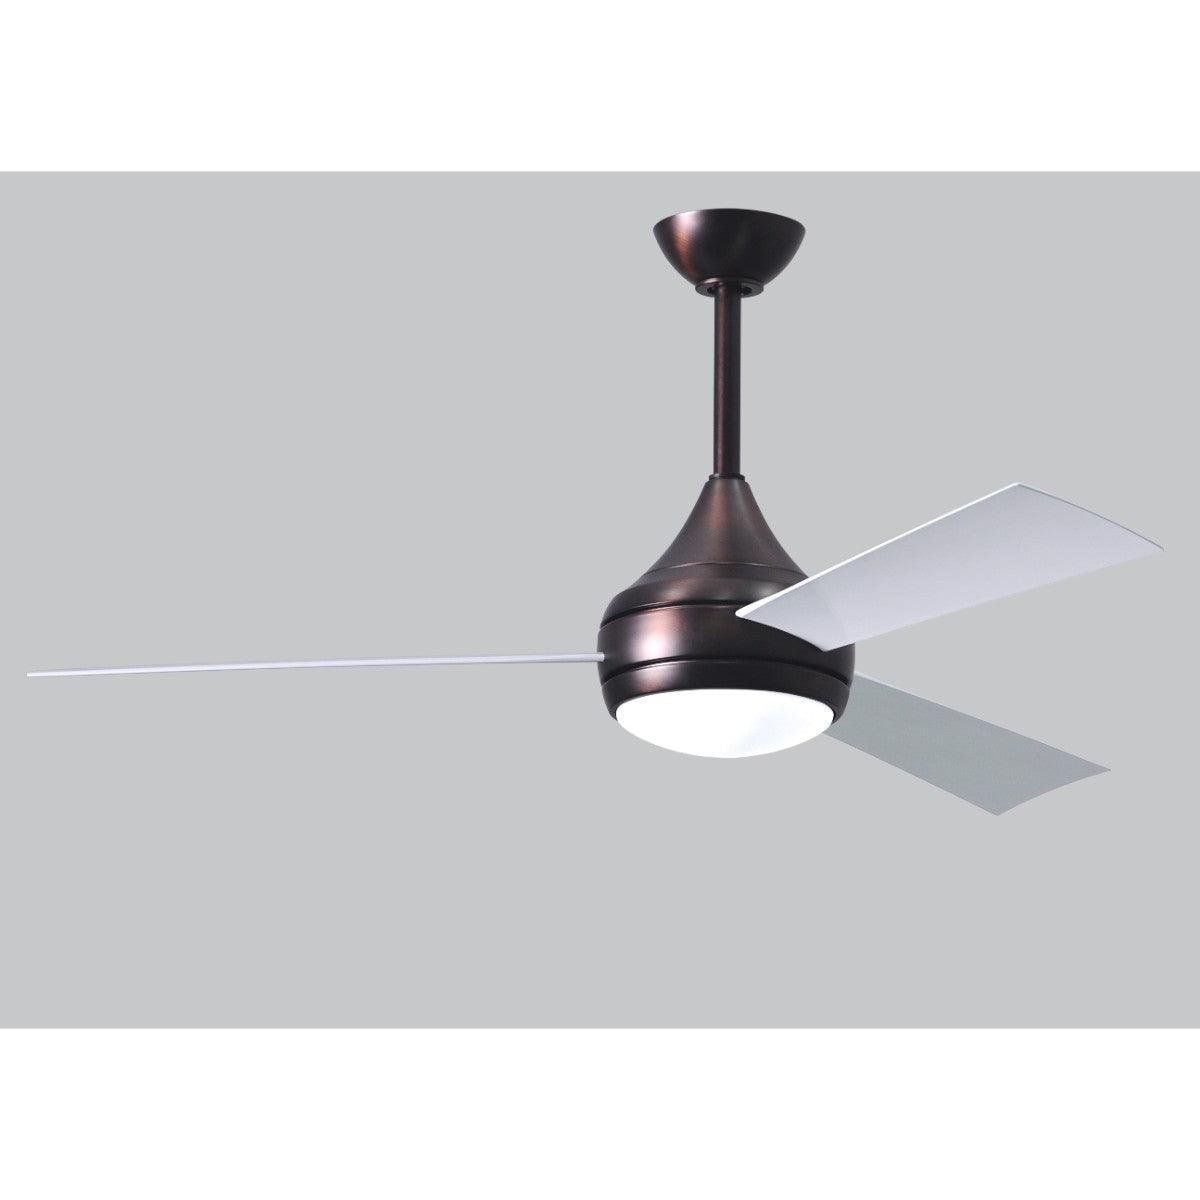 Donaire 52 Inch Propeller Outdoor Ceiling Fan With Light And Remote, Marine Grade